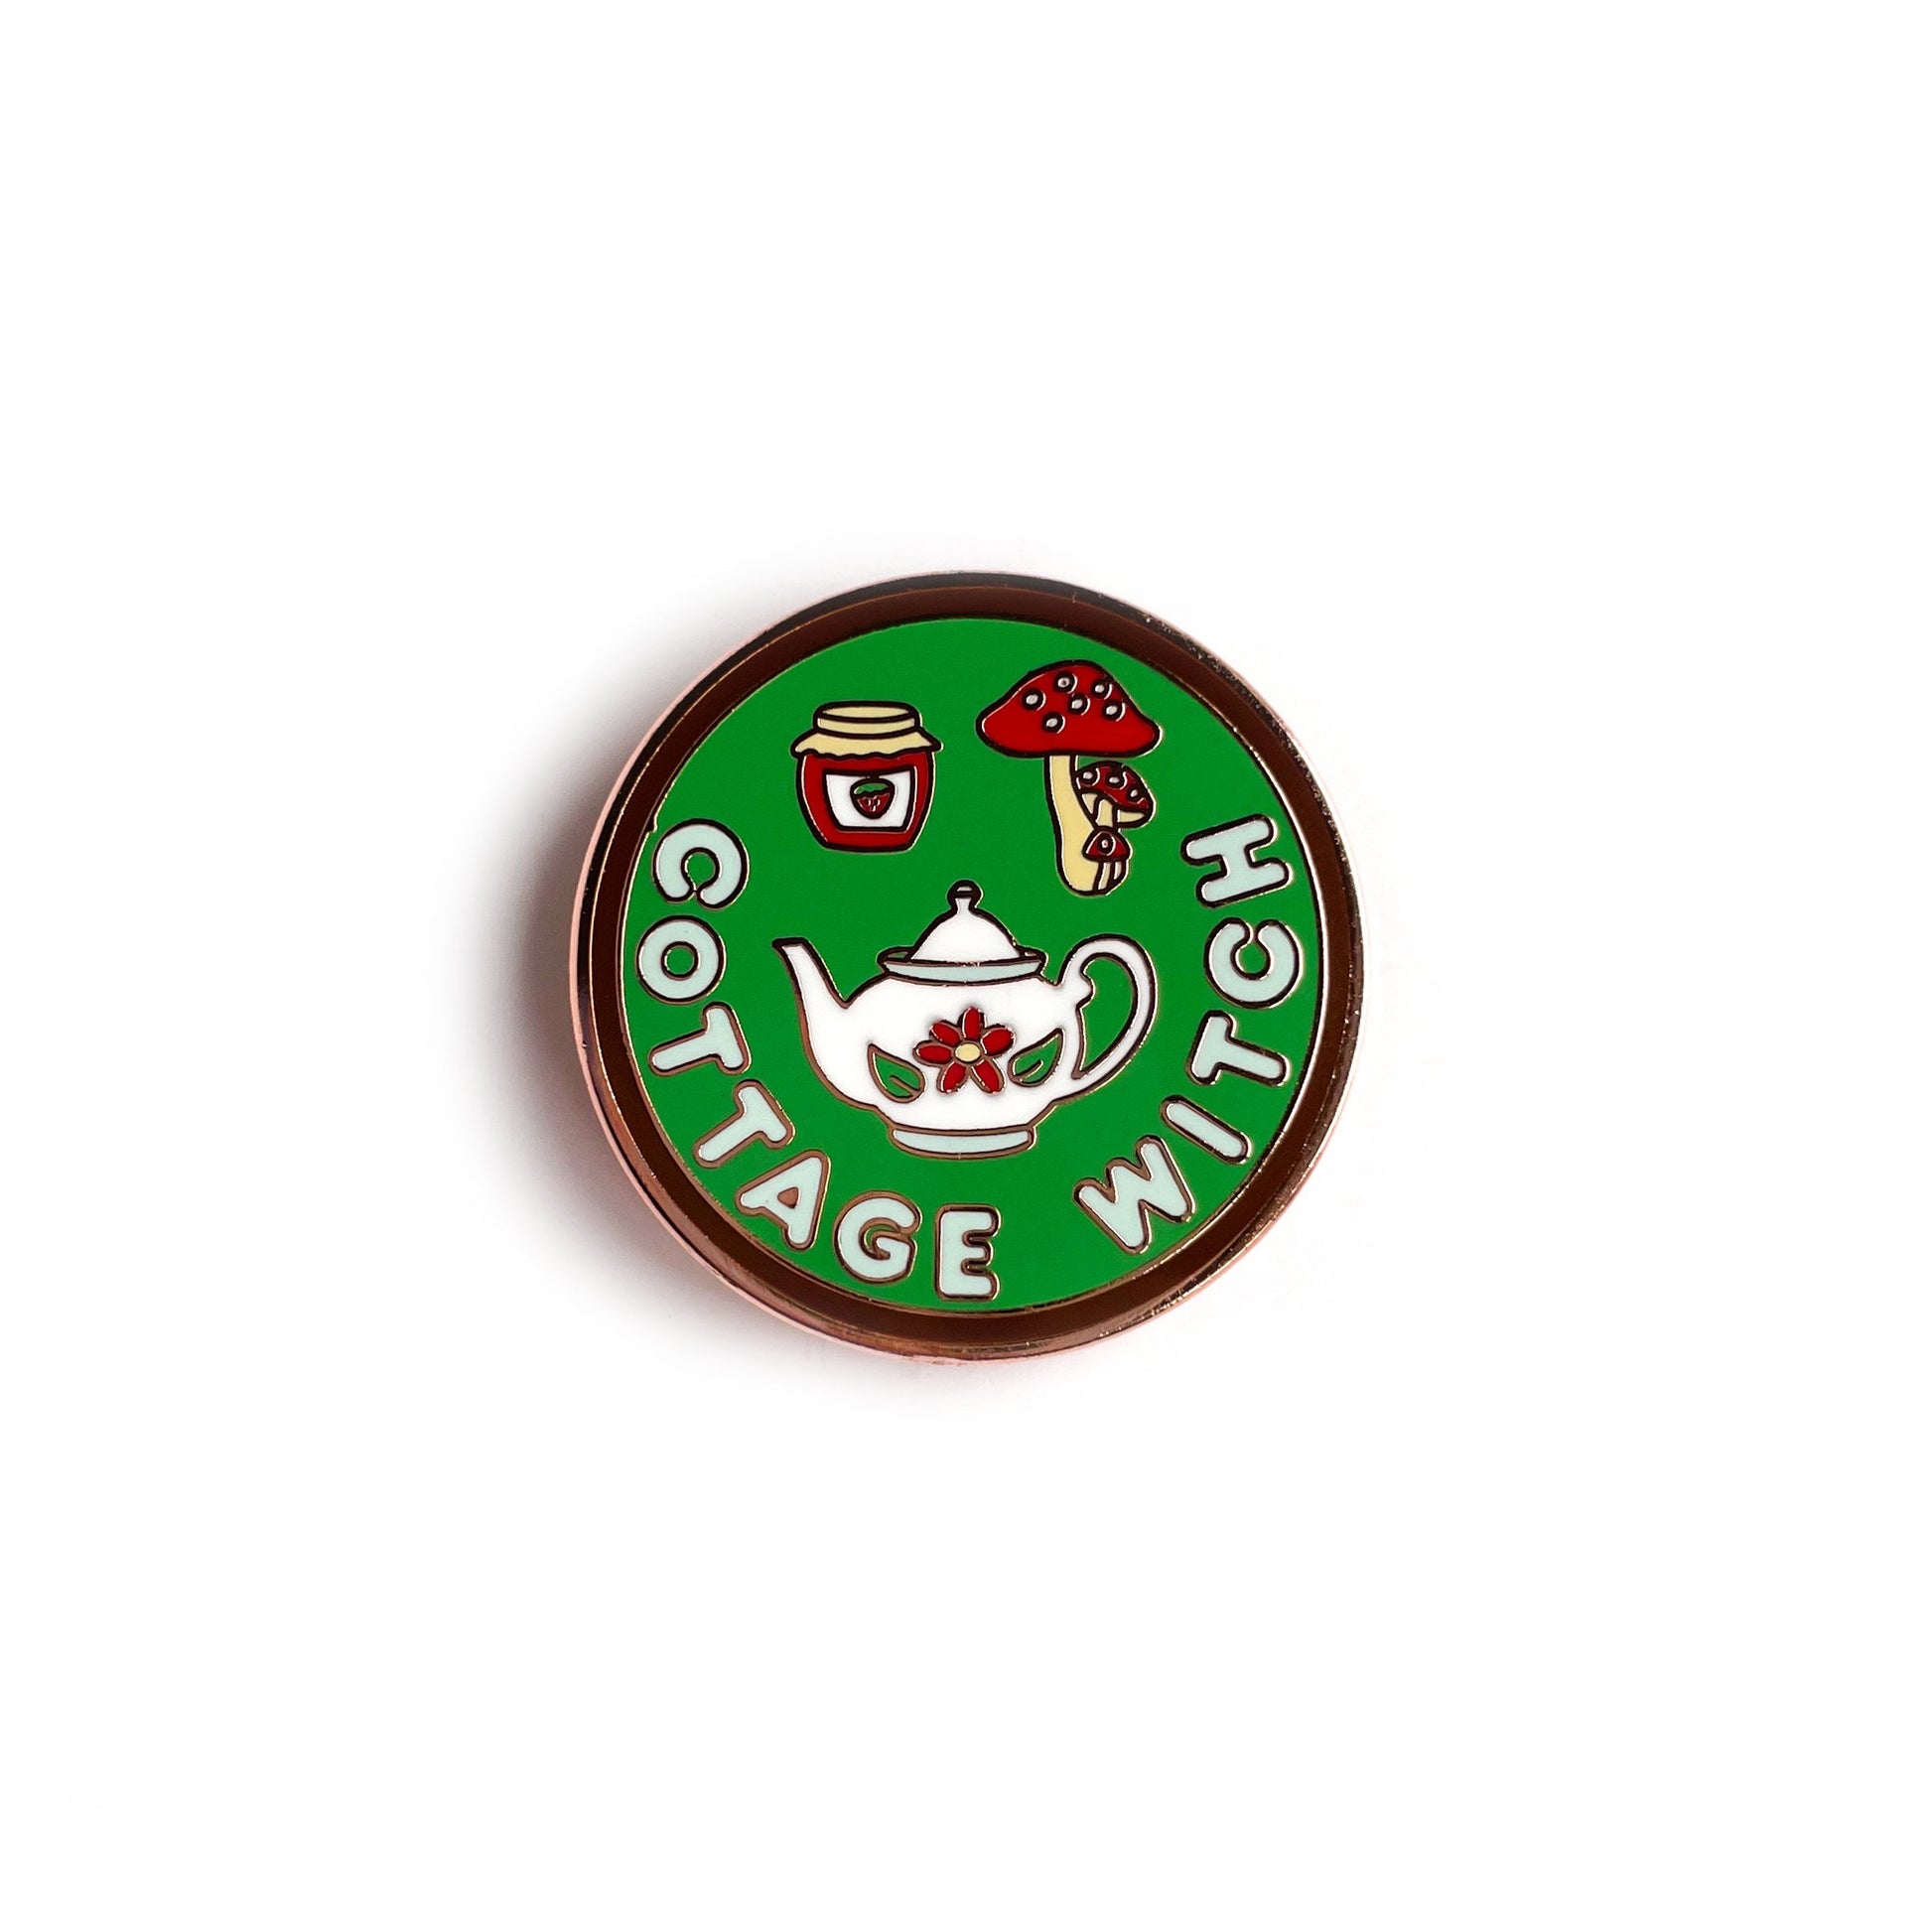 A circular enamel pin. It has a brown border with a sage green background and letters in light blue that read "Cottage Witch". It has a floral teapot, strawberry jam jar, and red mushrooms depicted on it. 